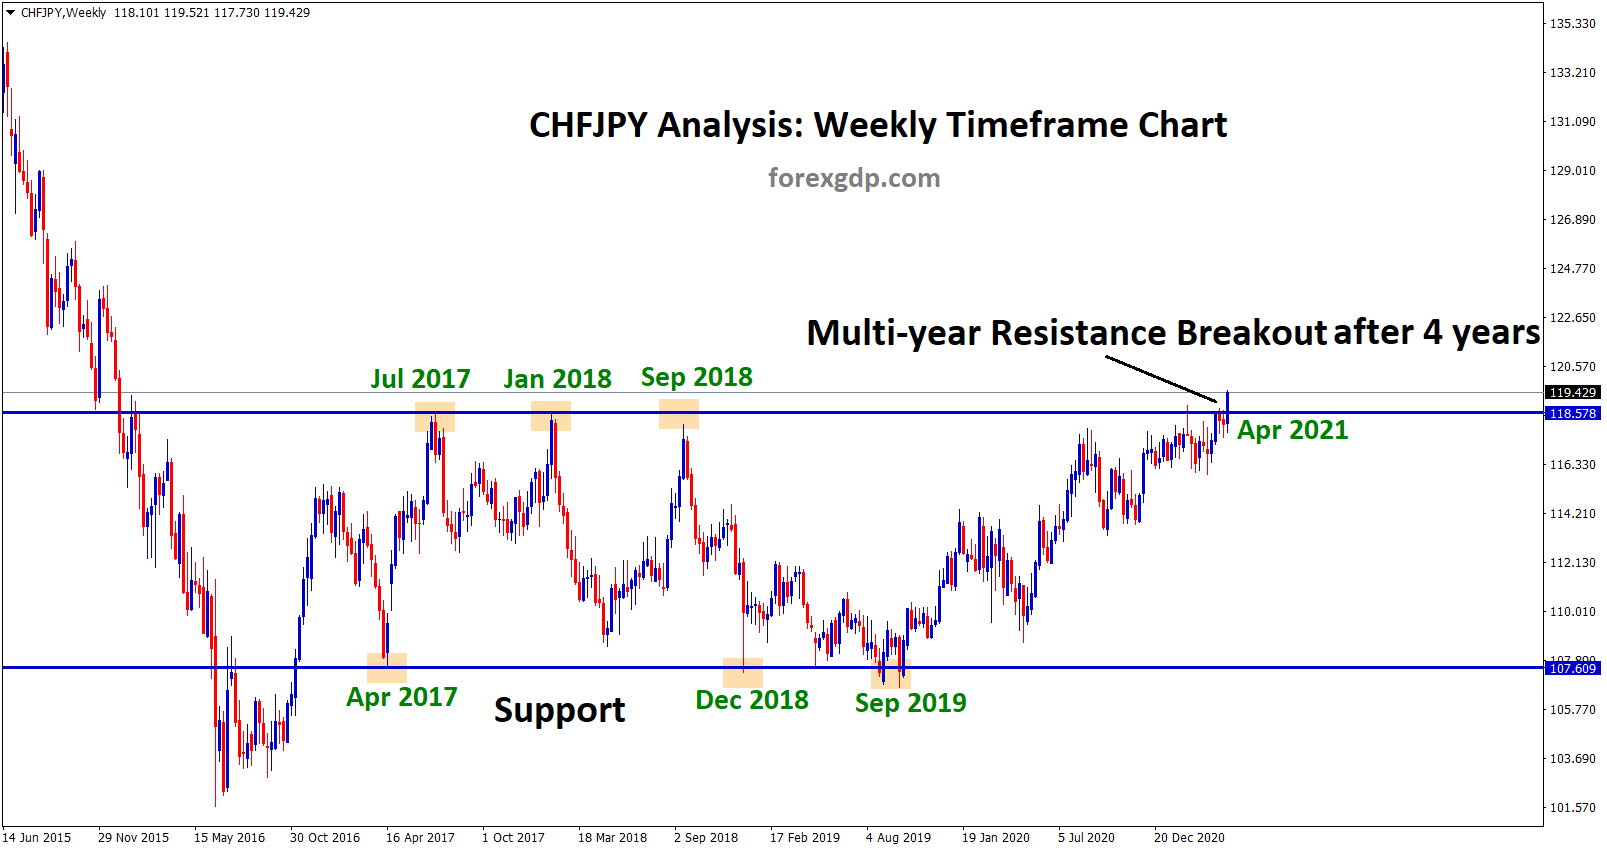 CHFJPY Multi year resistance breakout after 4 years